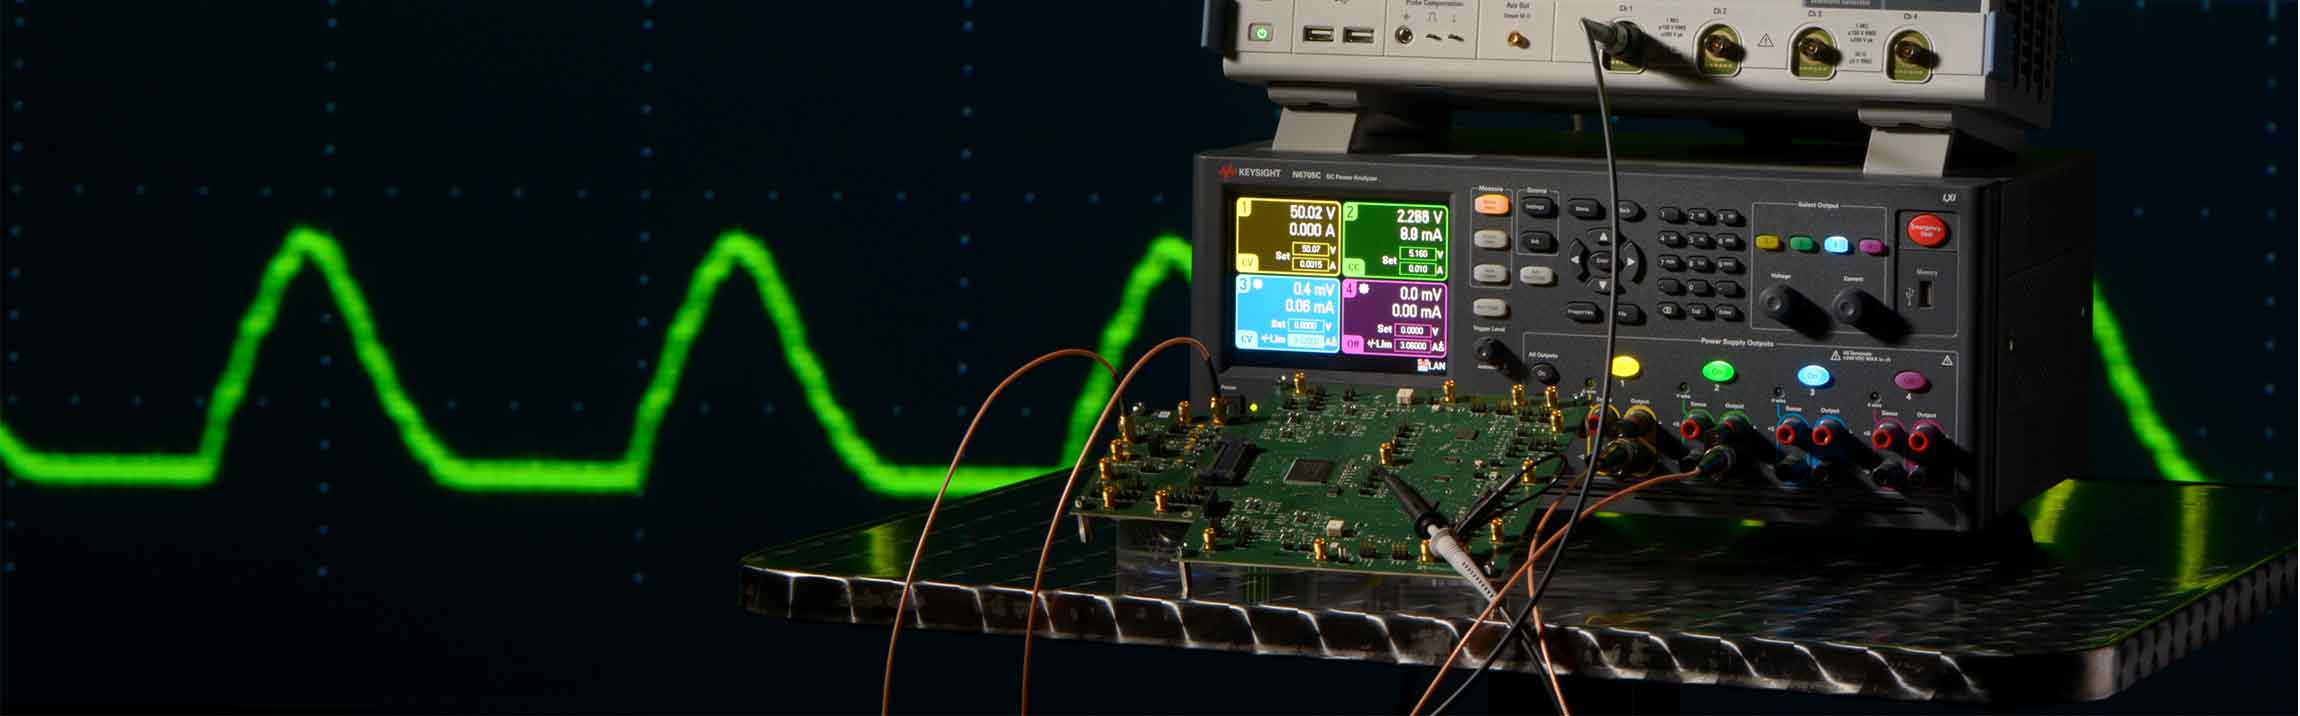 measurement setup for an eight-channel ultrasonic transceiver chip